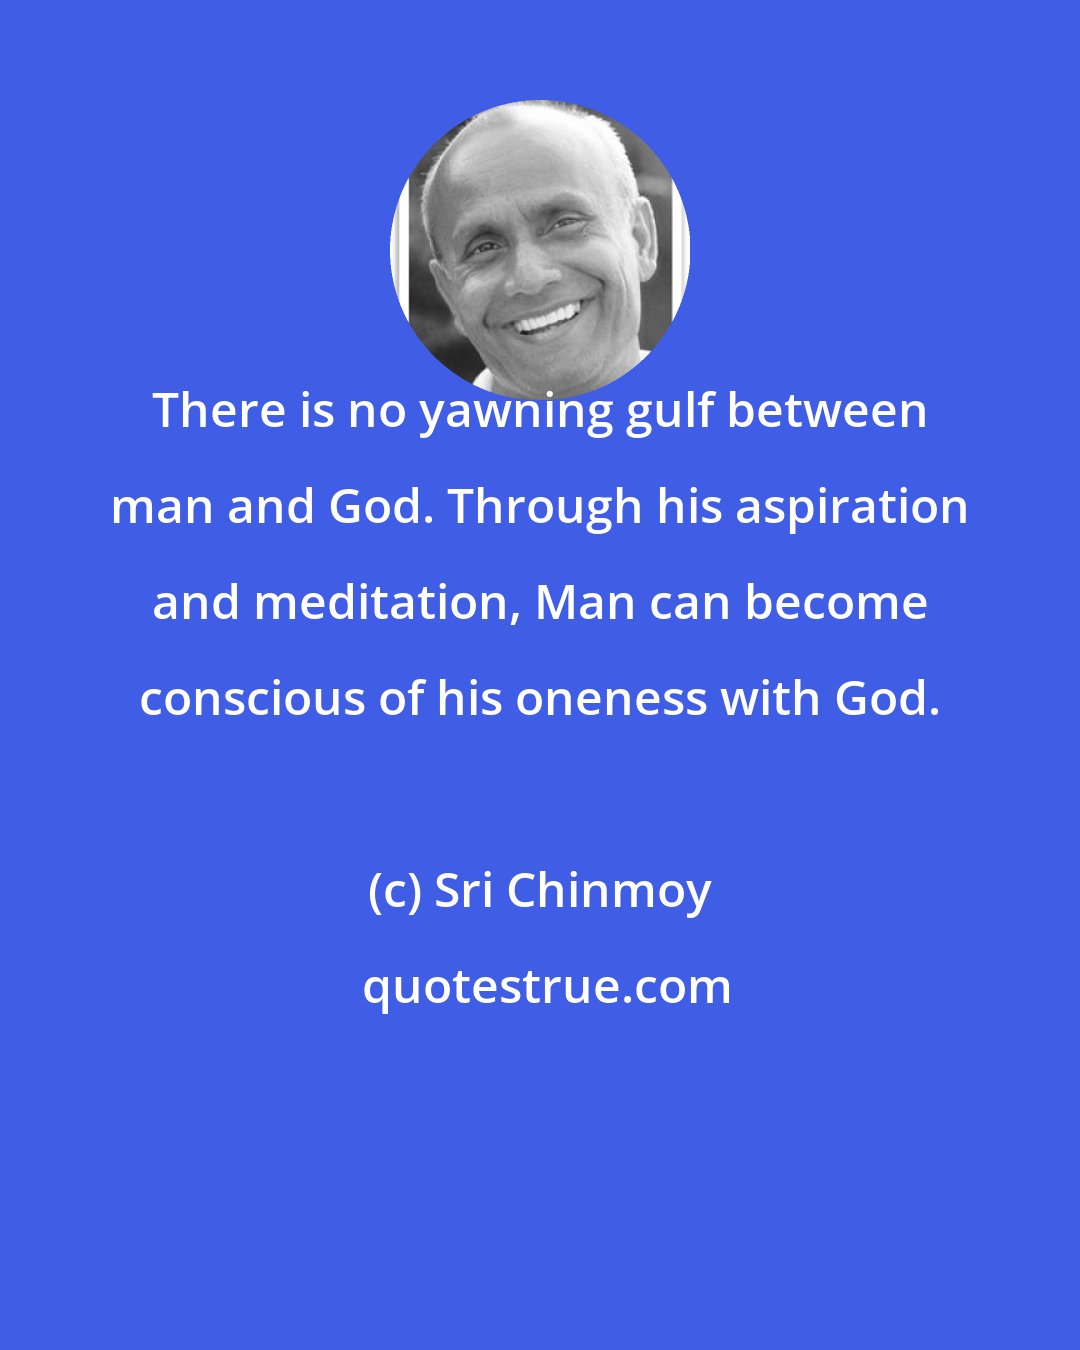 Sri Chinmoy: There is no yawning gulf between man and God. Through his aspiration and meditation, Man can become conscious of his oneness with God.